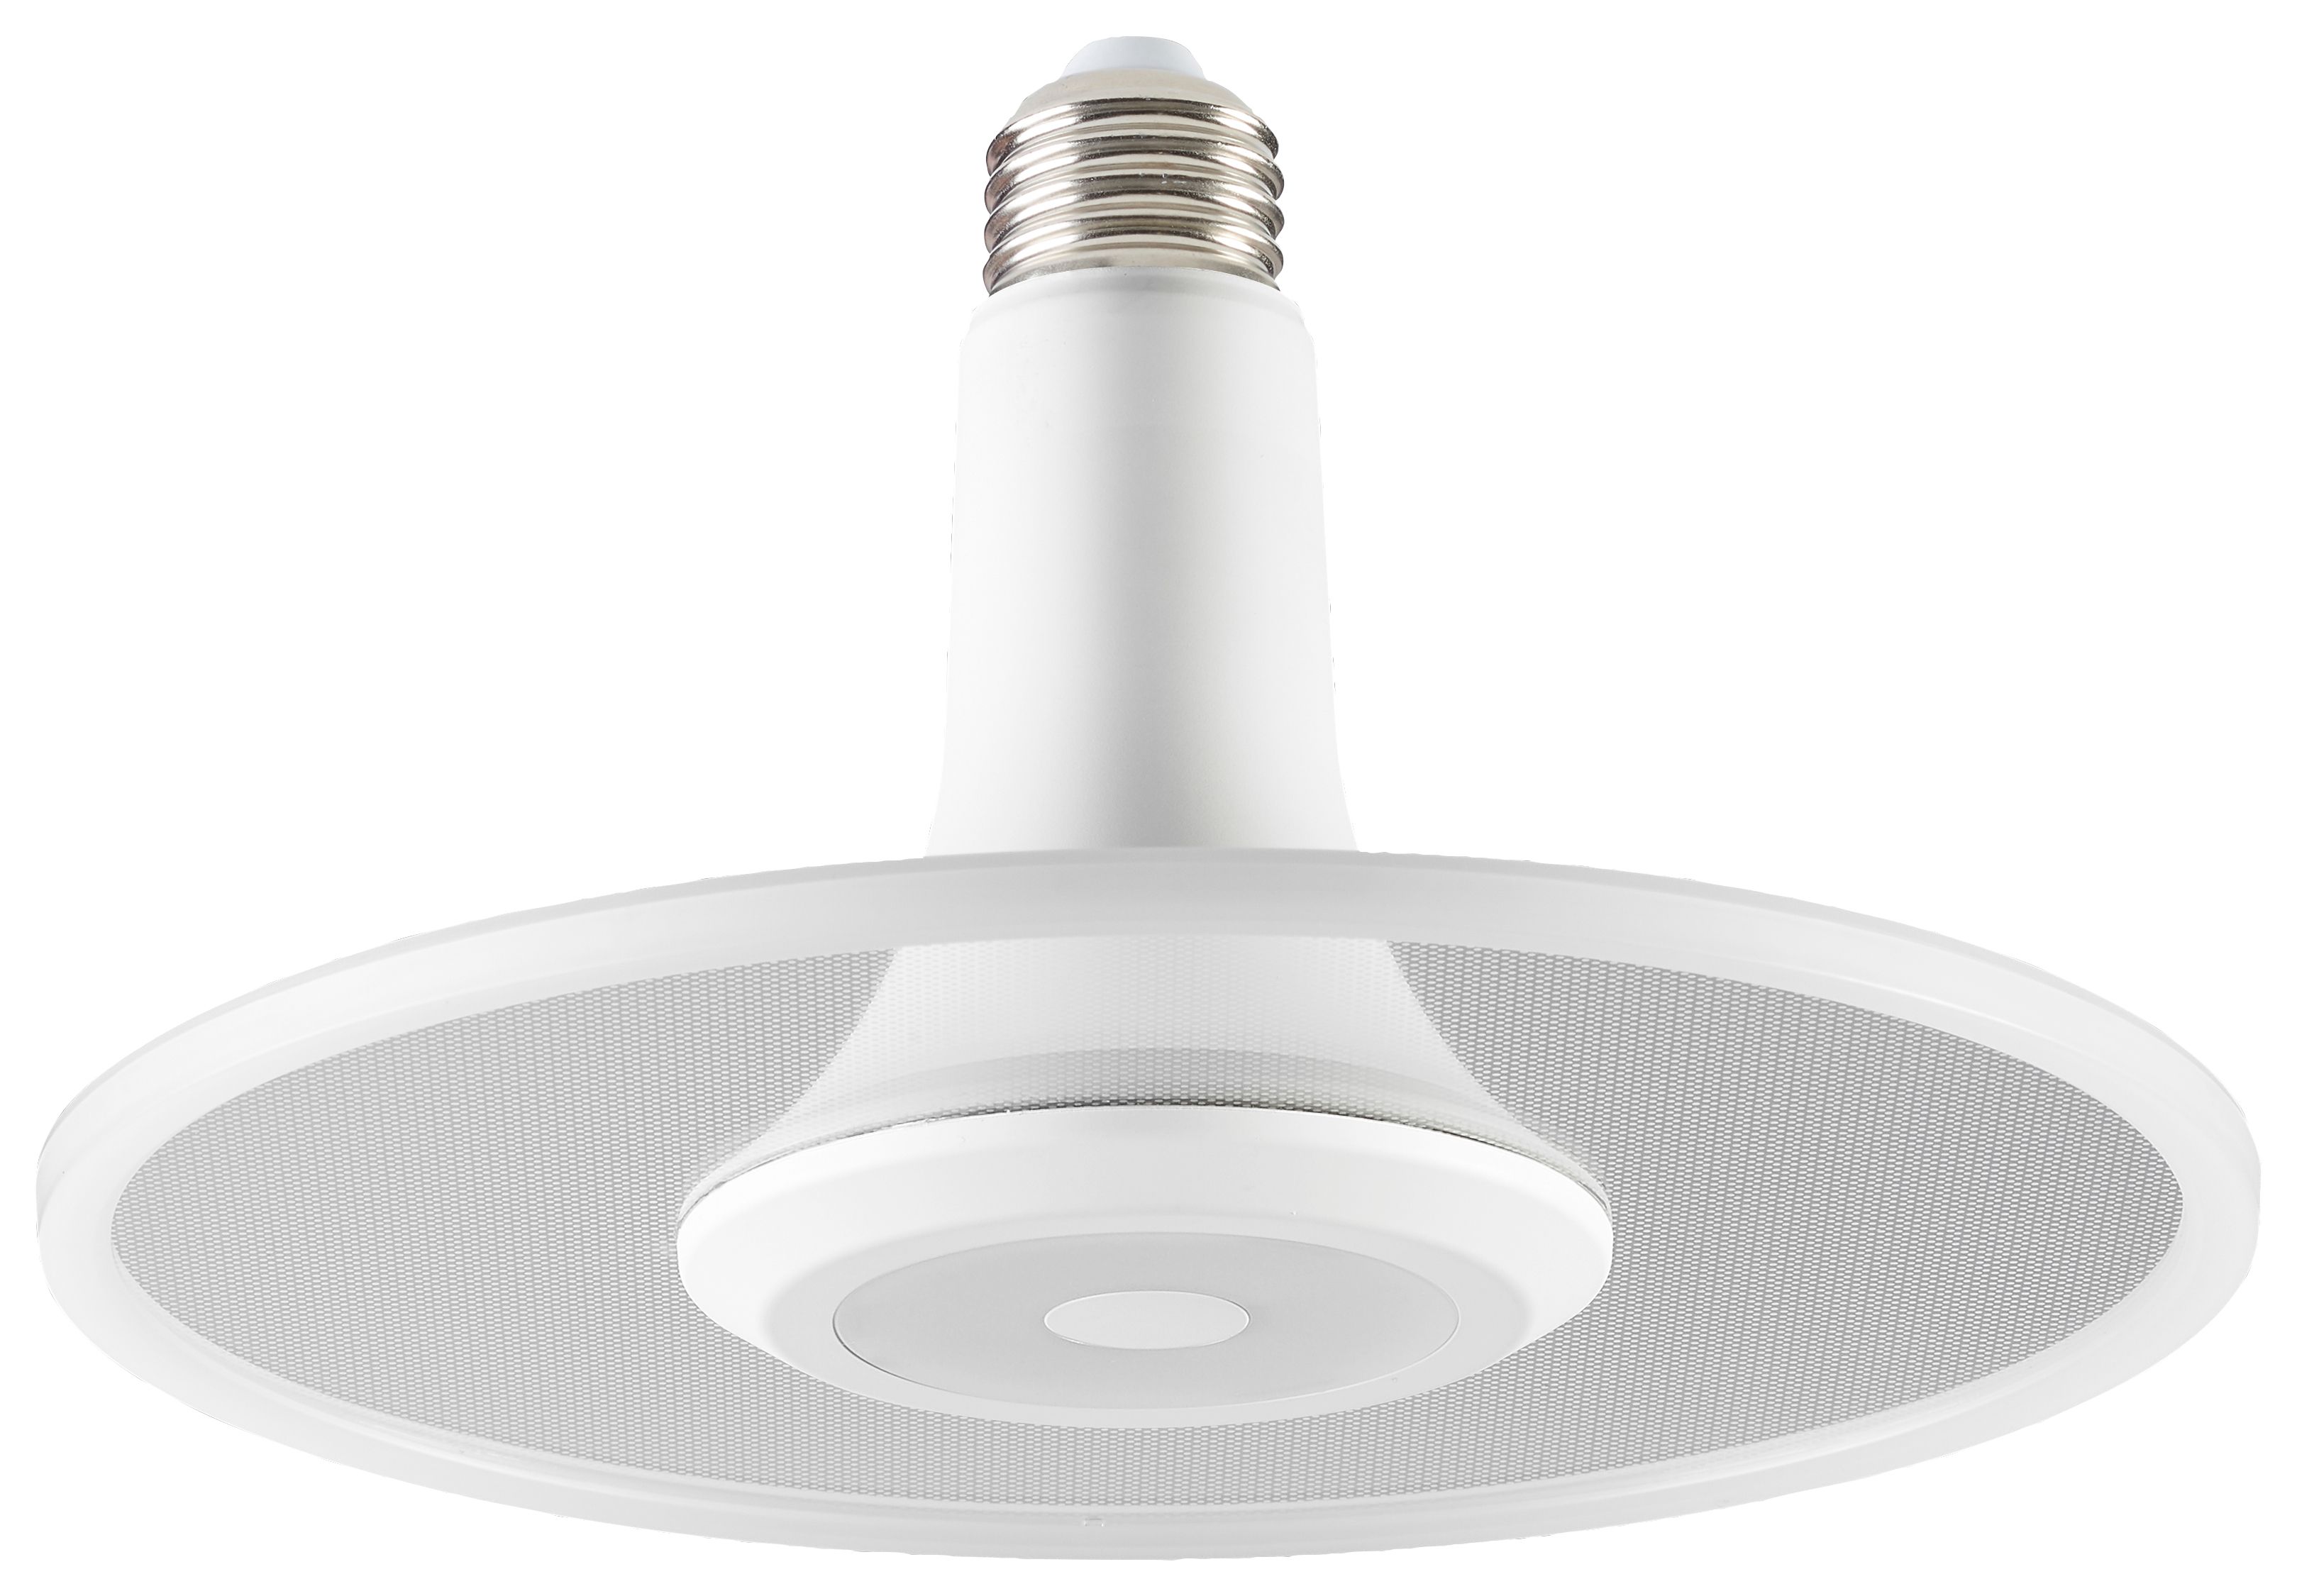 Image of Sylvania LED Radiance Lampinaire 1000Lm Dimmable E27 Fitting - White